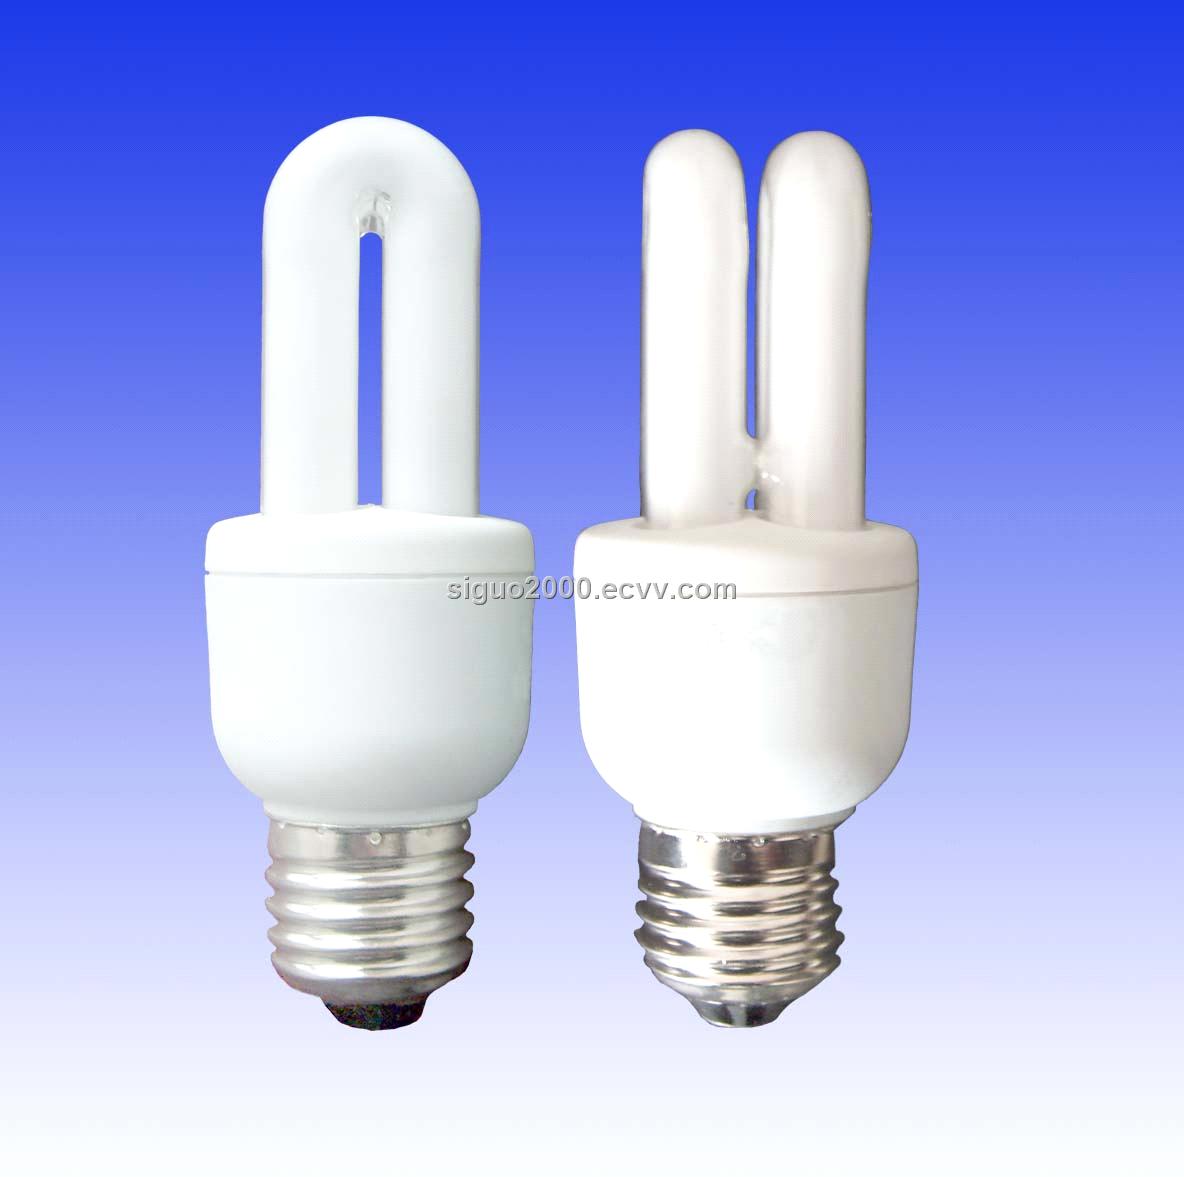 Napier Steil schrobben U type lamp tube from China Manufacturer, Manufactory, Factory and Supplier  on ECVV.com